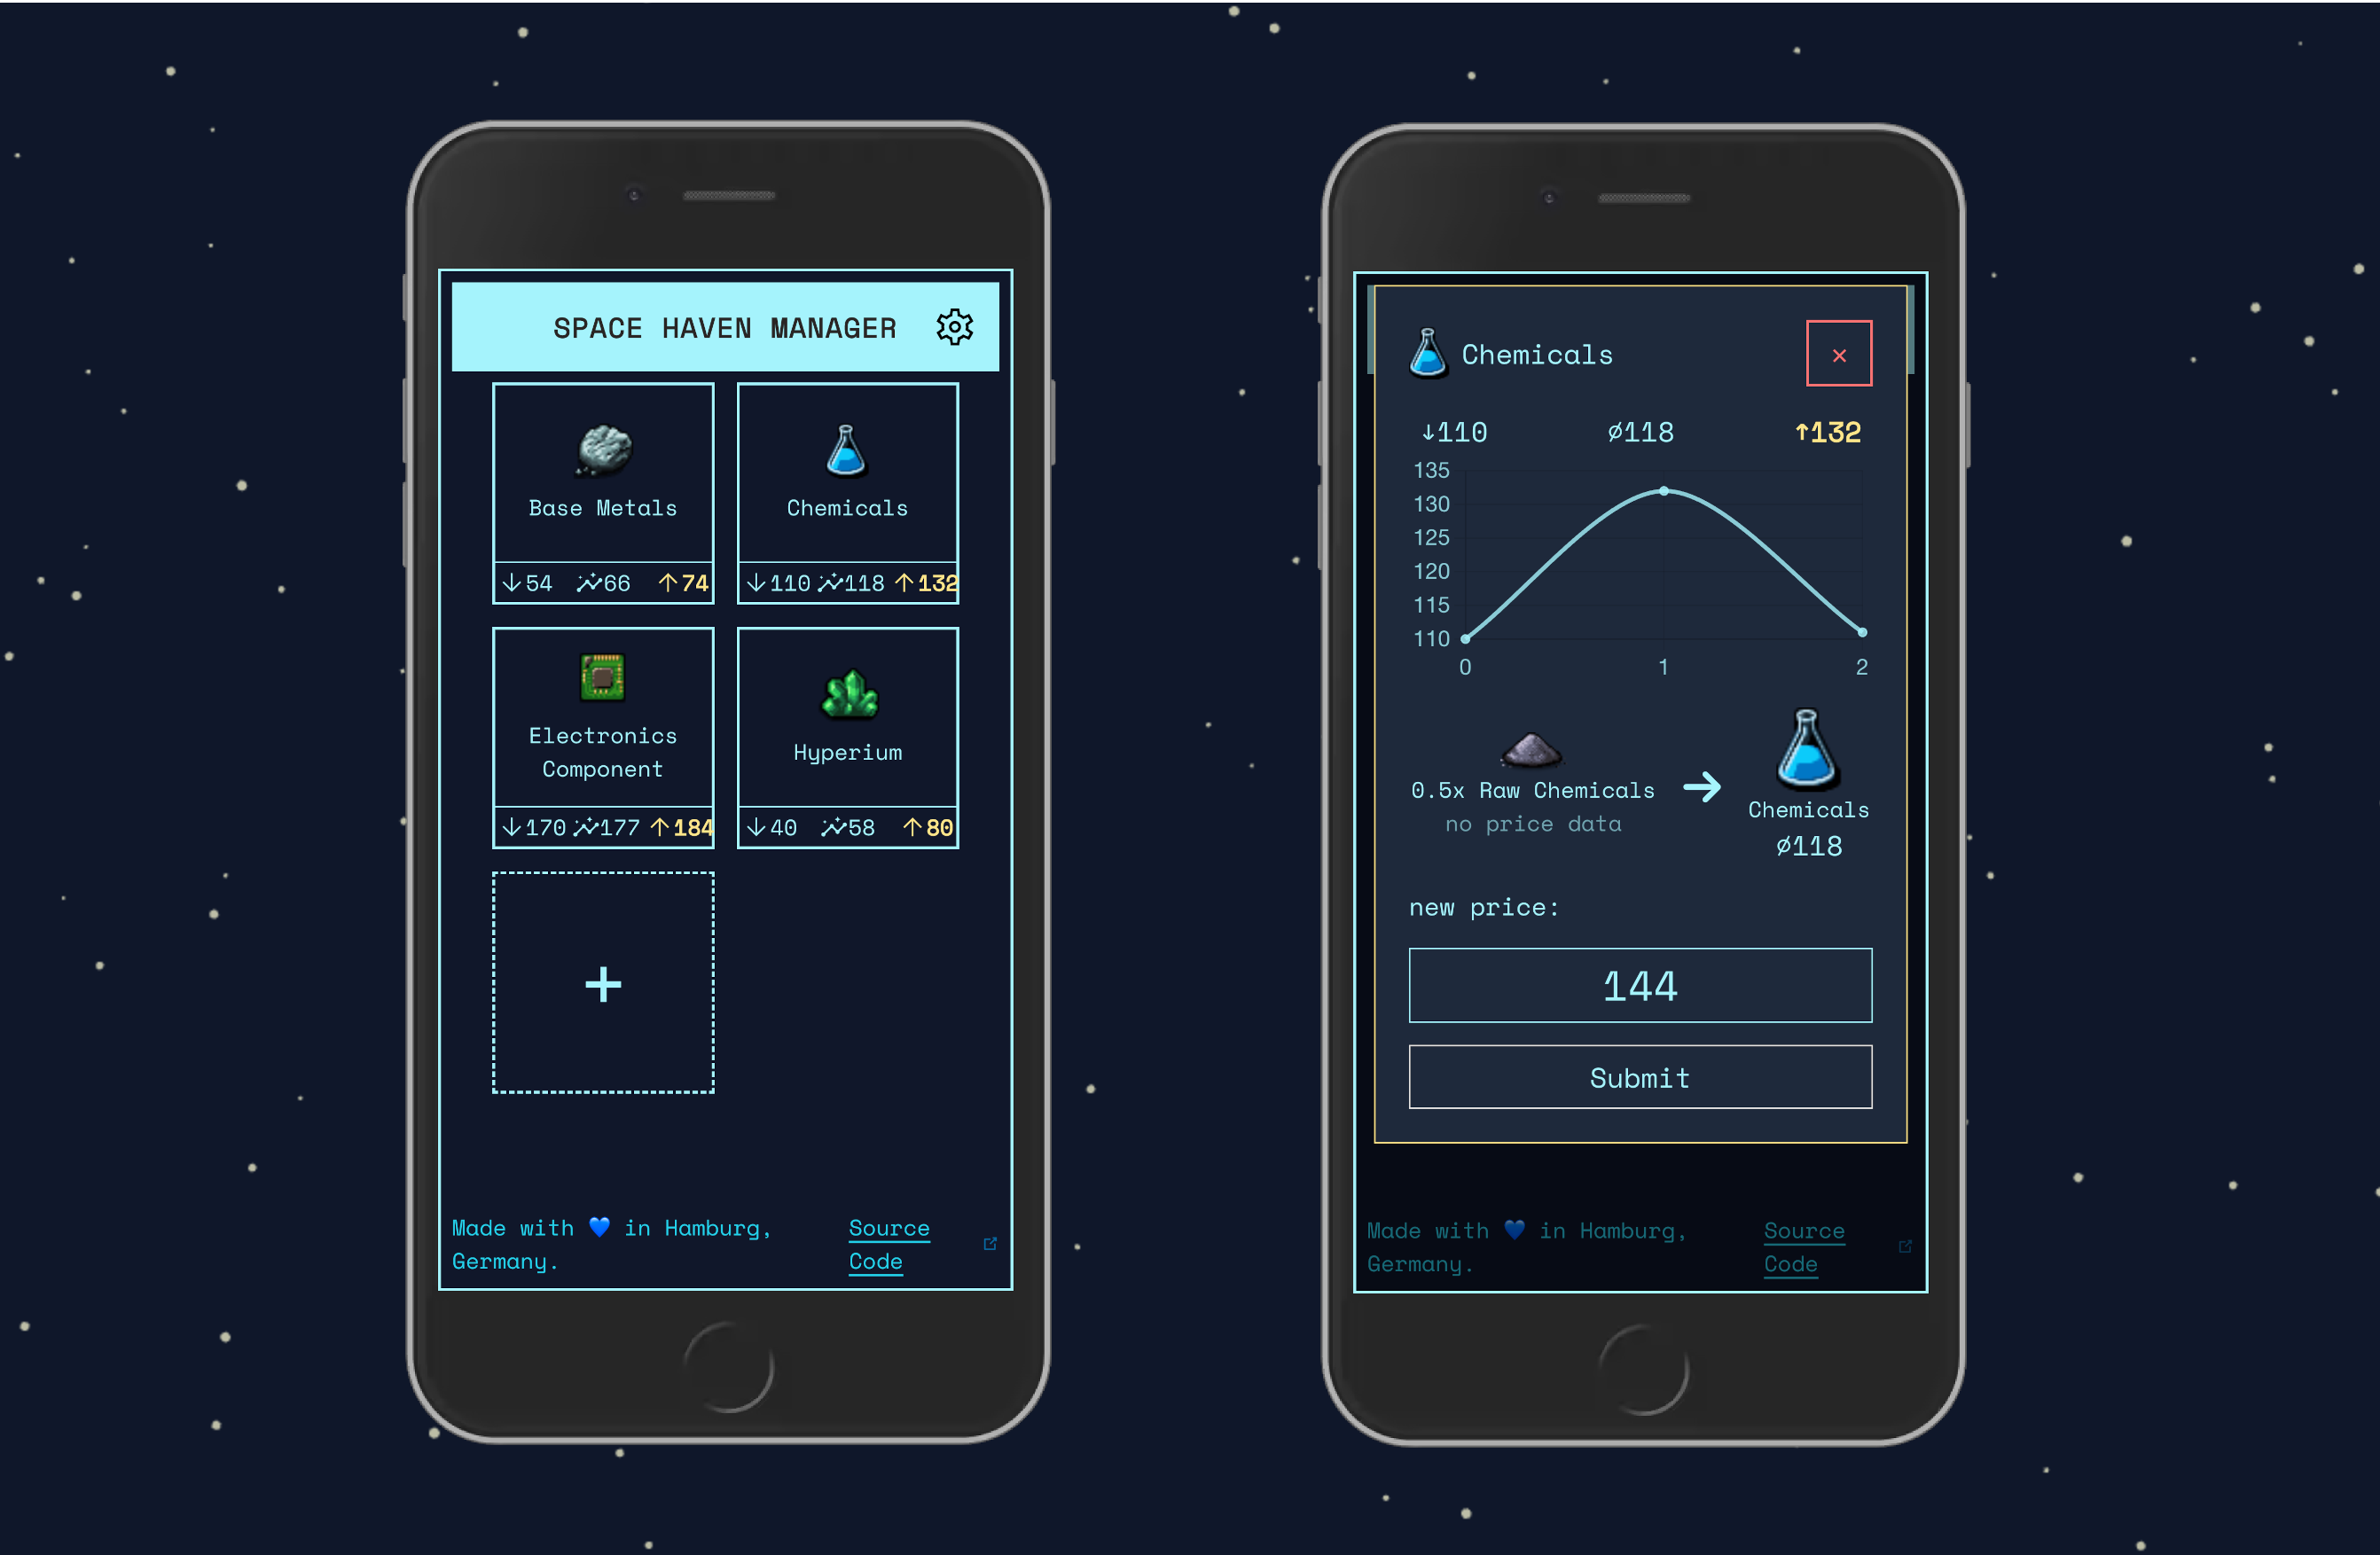 image of two examples from the interface of space haven manager